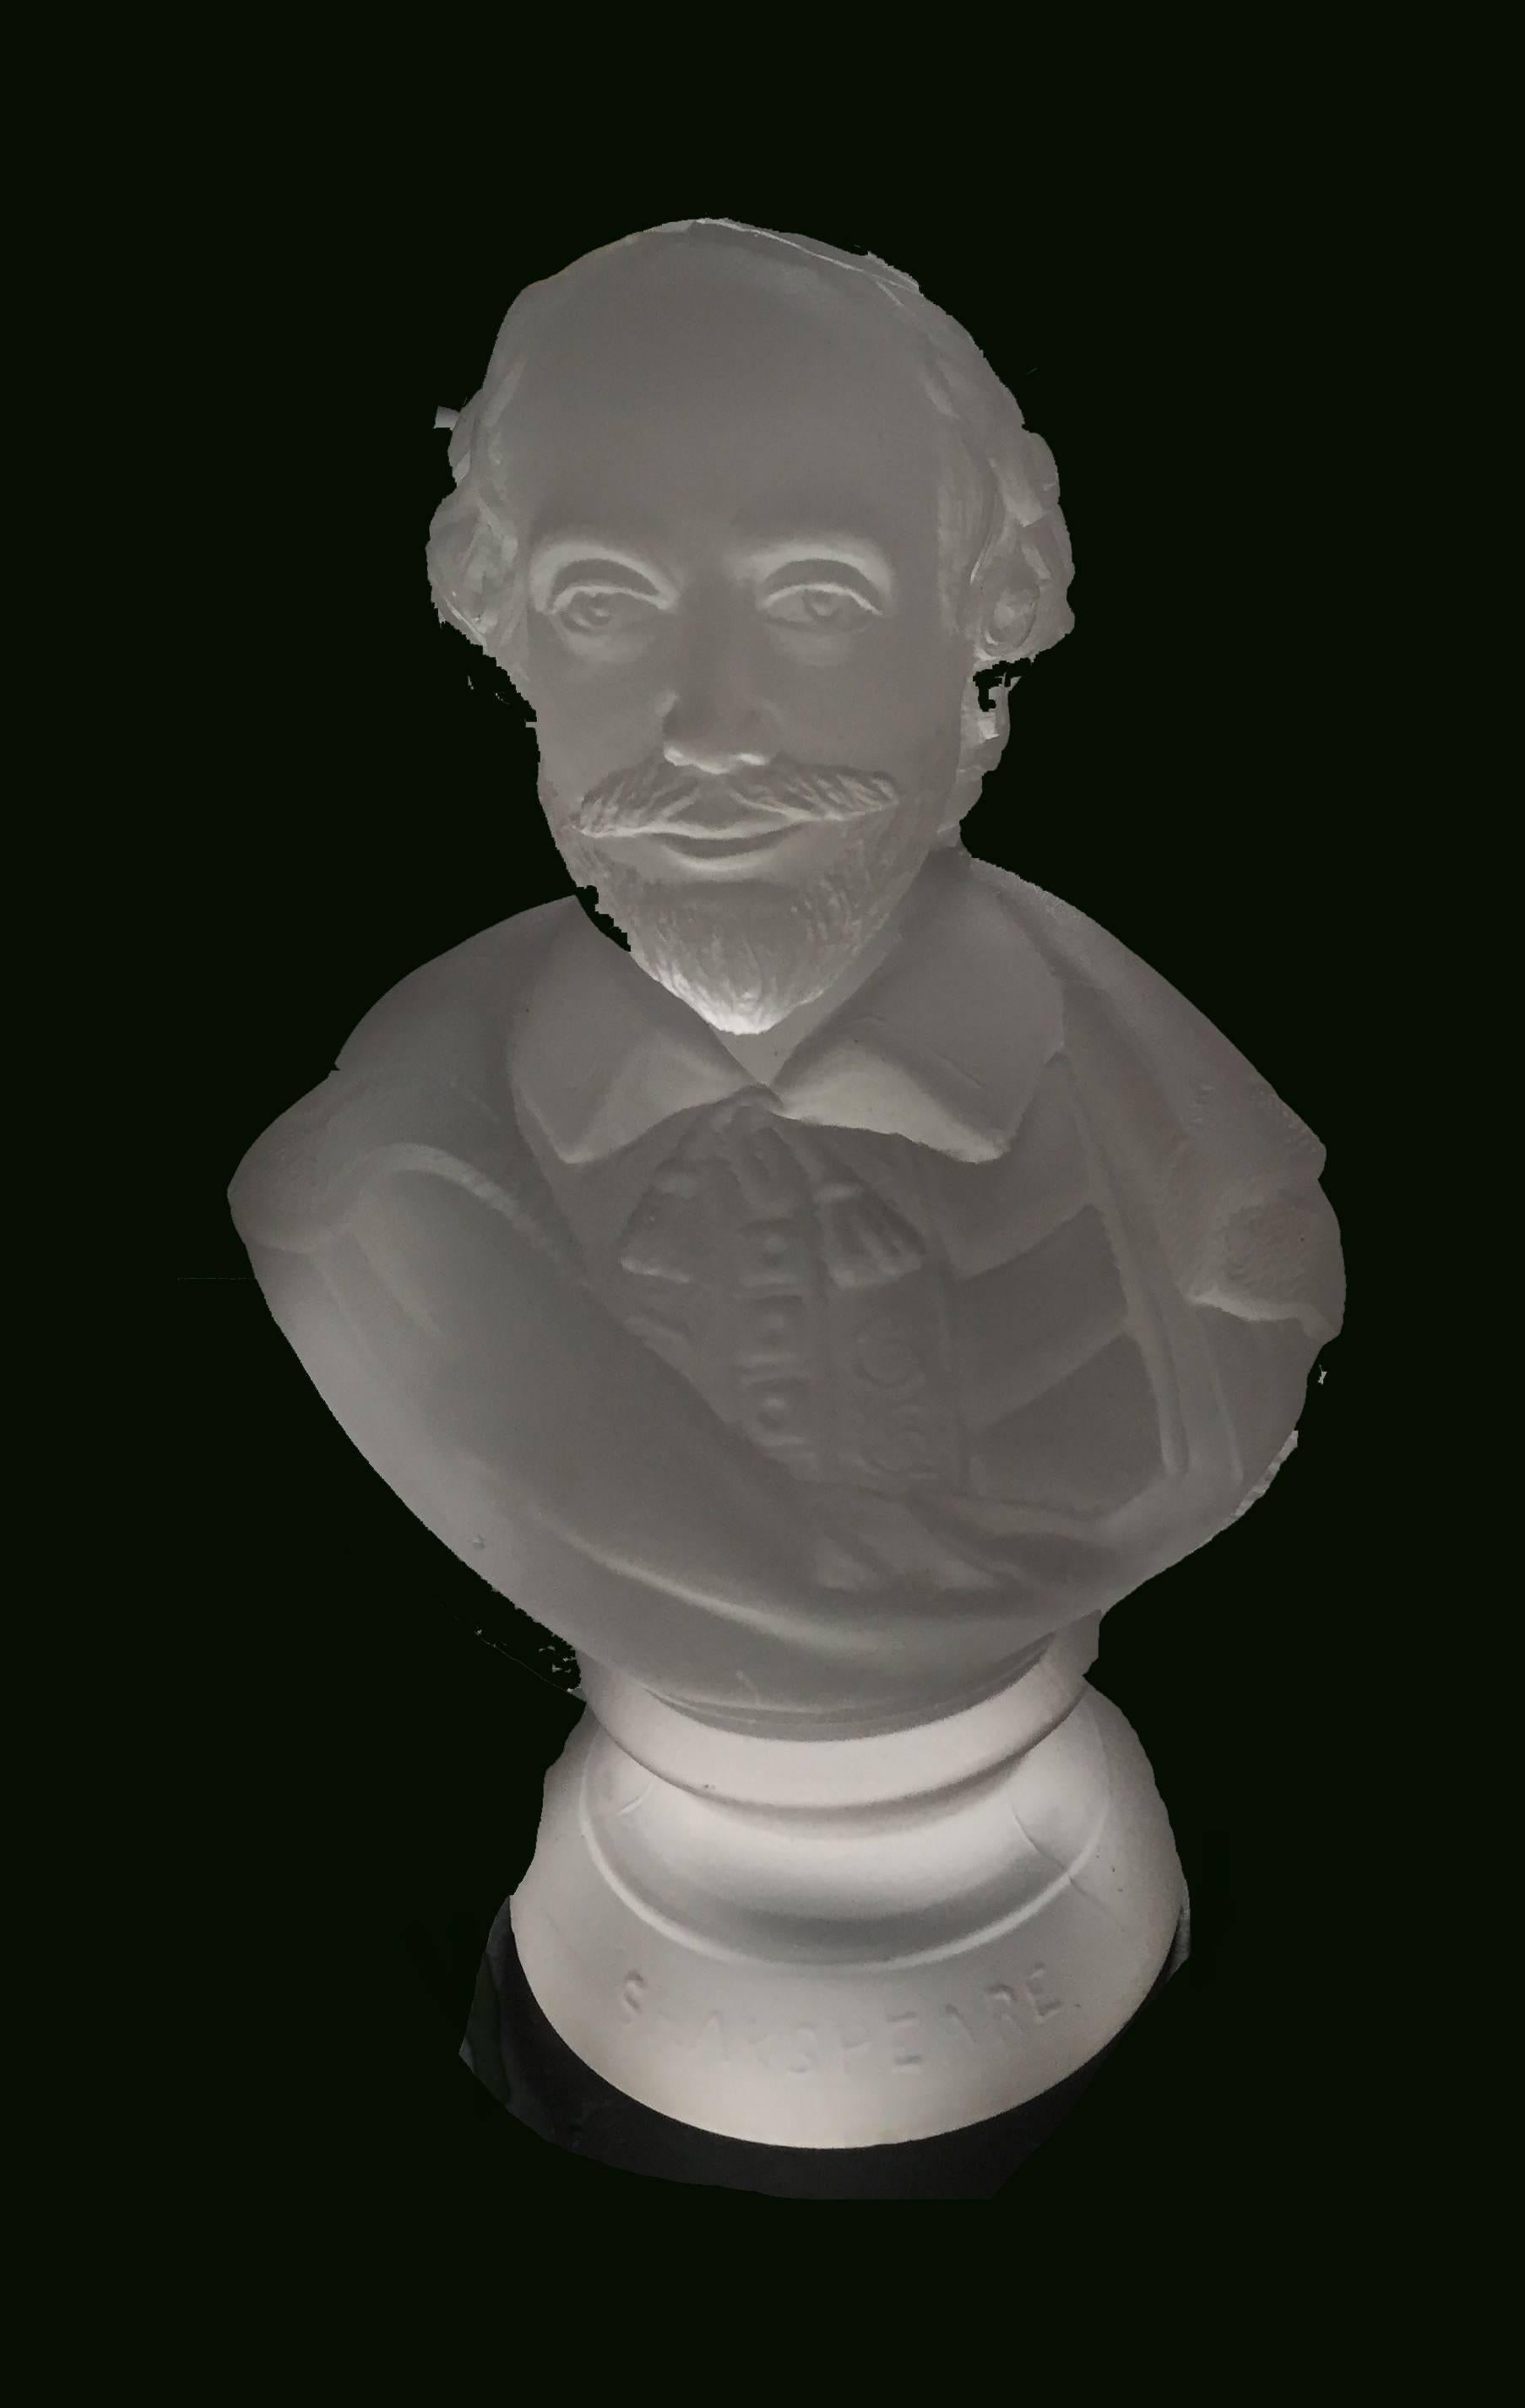 American Philadelphia Centennial frosted colorless pressed and acid-etched glass bust of William Shakespeare by Gillinder Glass Works, Philadelphia.

Embossed 